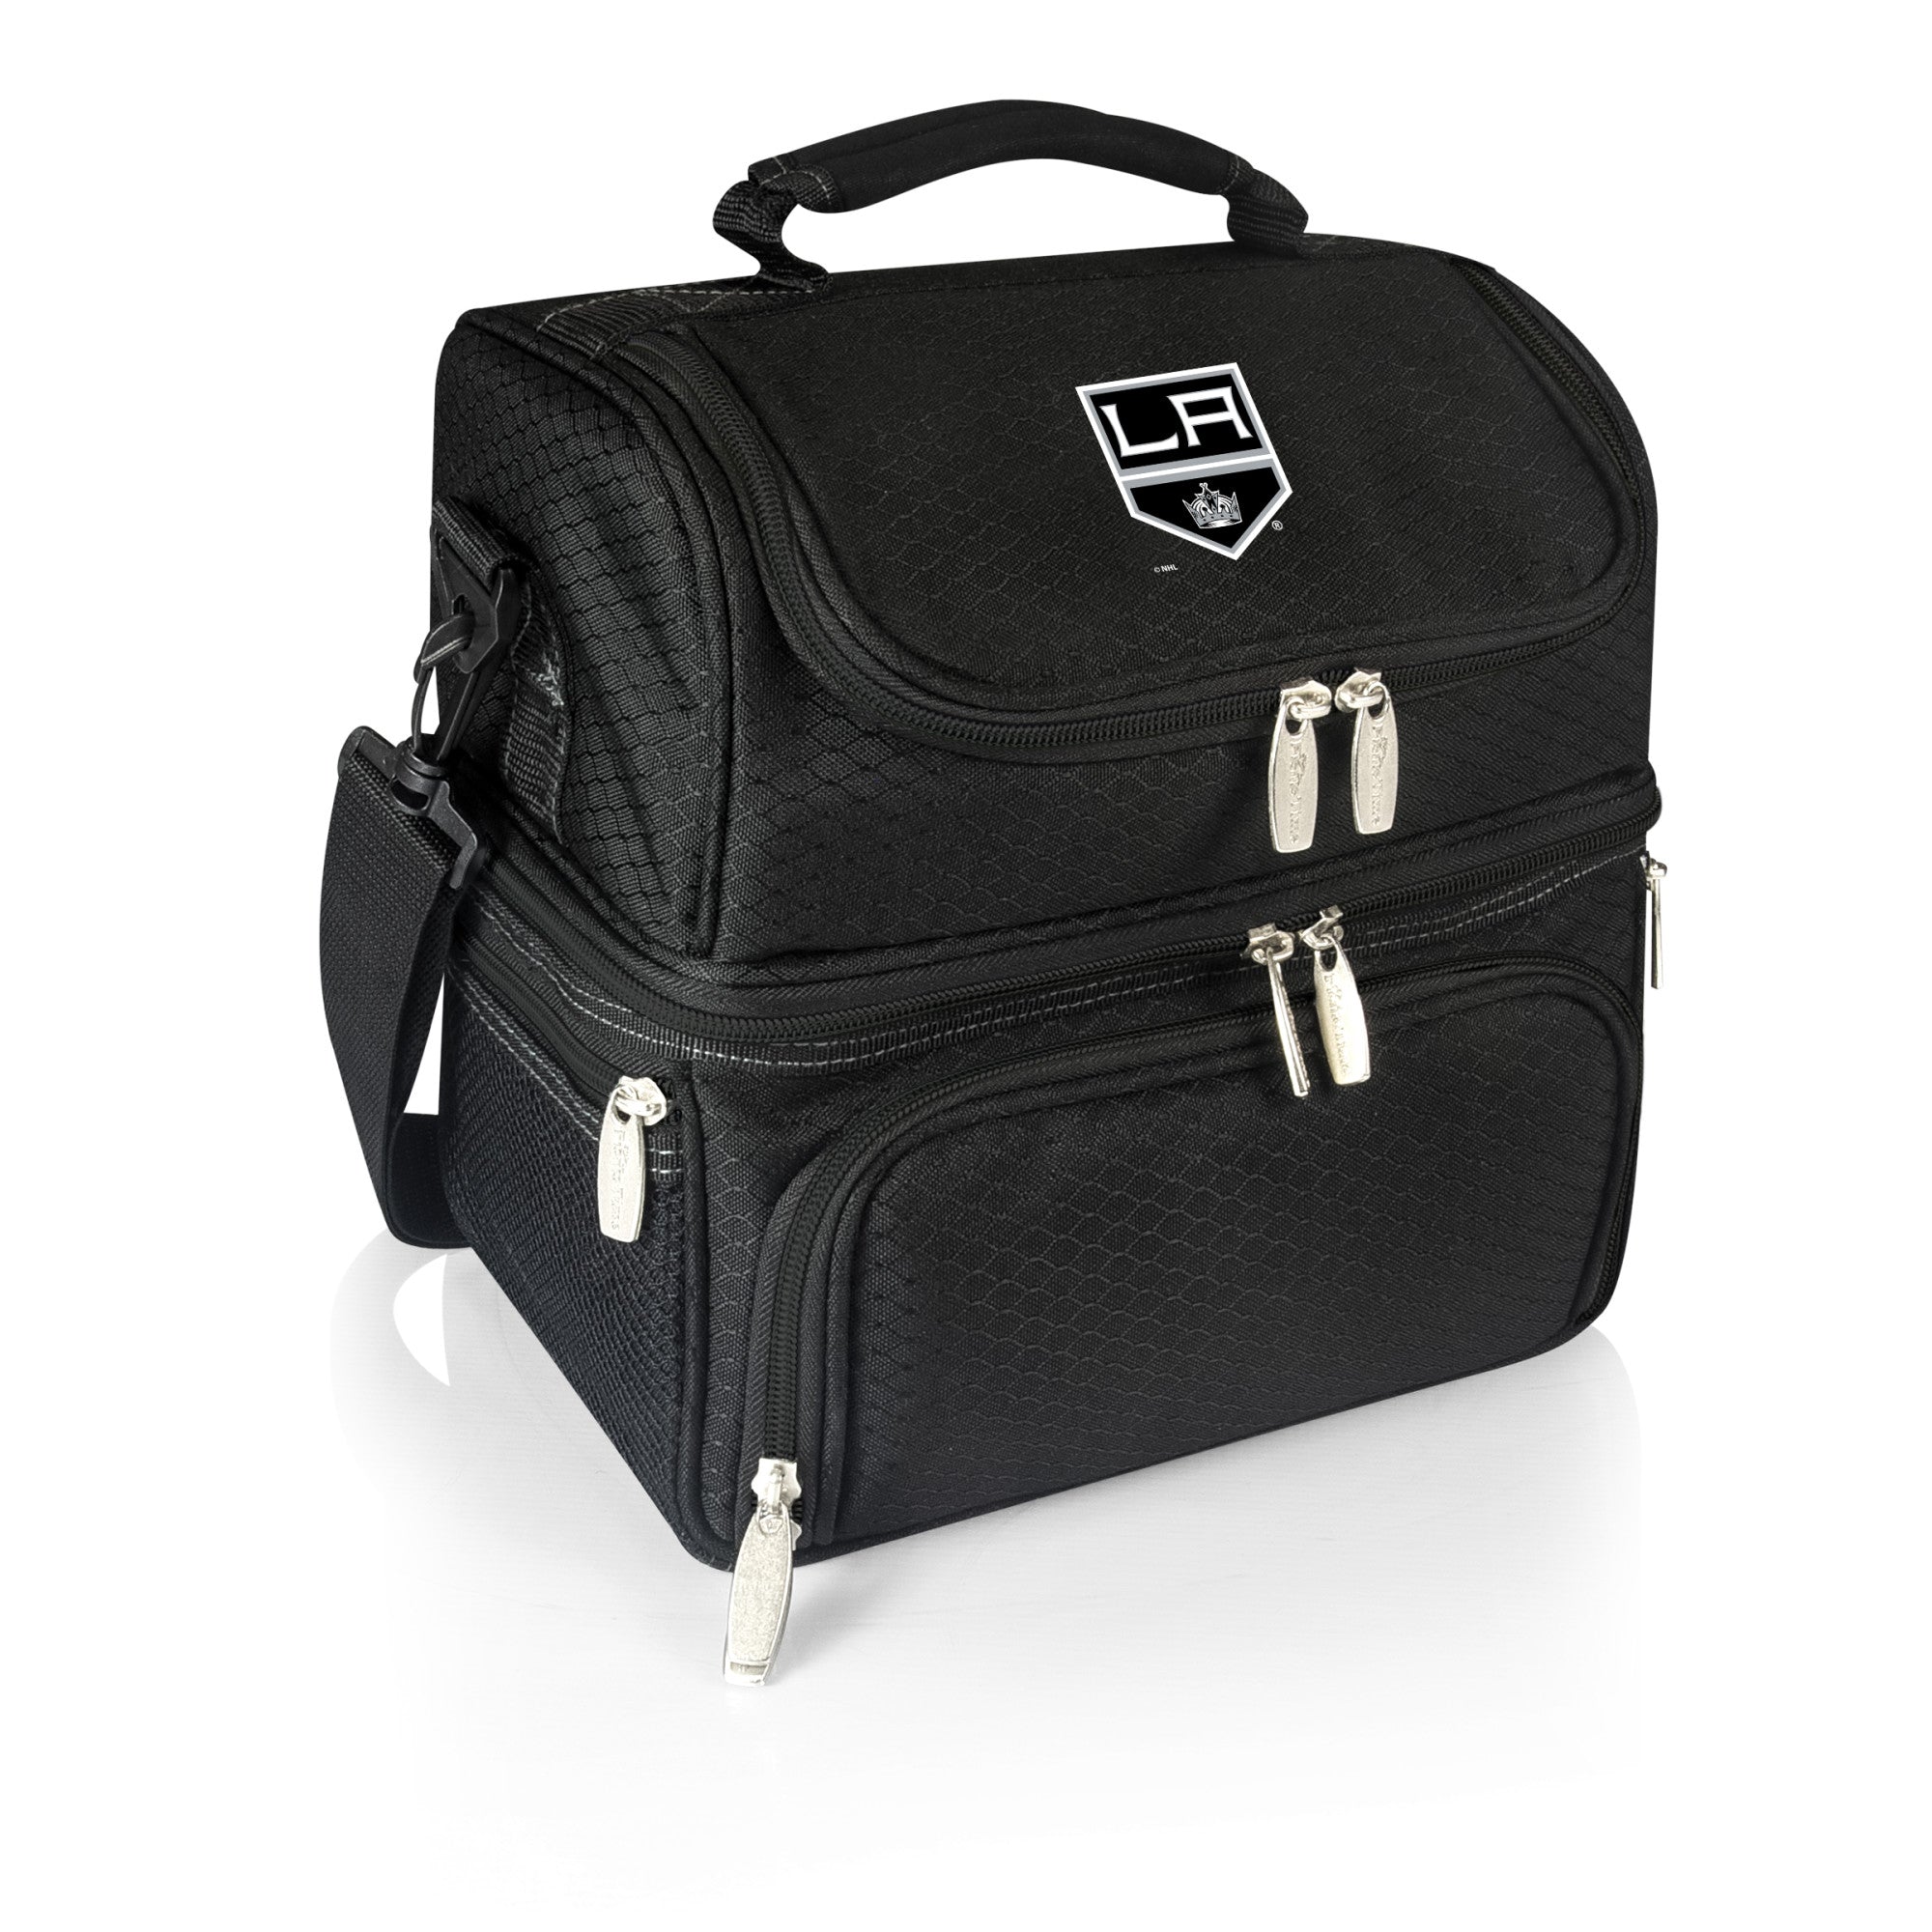 Los Angeles Kings - Pranzo Lunch Bag Cooler with Utensils